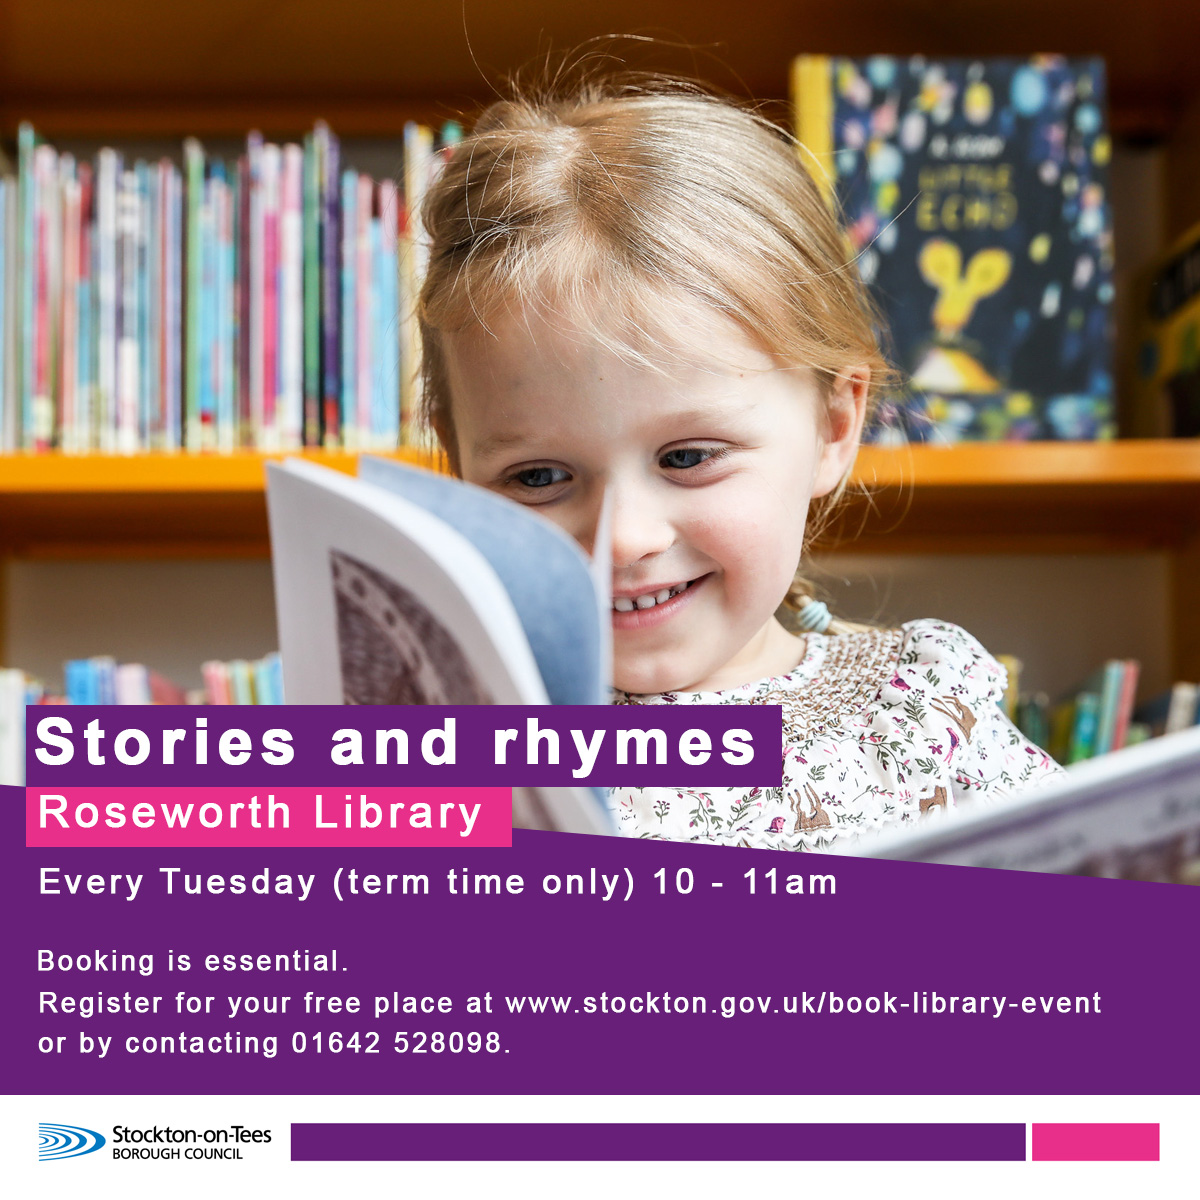 Enjoy stories and rhymes with your child at Roseworth Library on Tuesday 23 April, 10am. Register online stockton.spydus.co.uk/cgi-bin/spydus… or call 01642 528098. Suitable for ages 0 - 5 years.